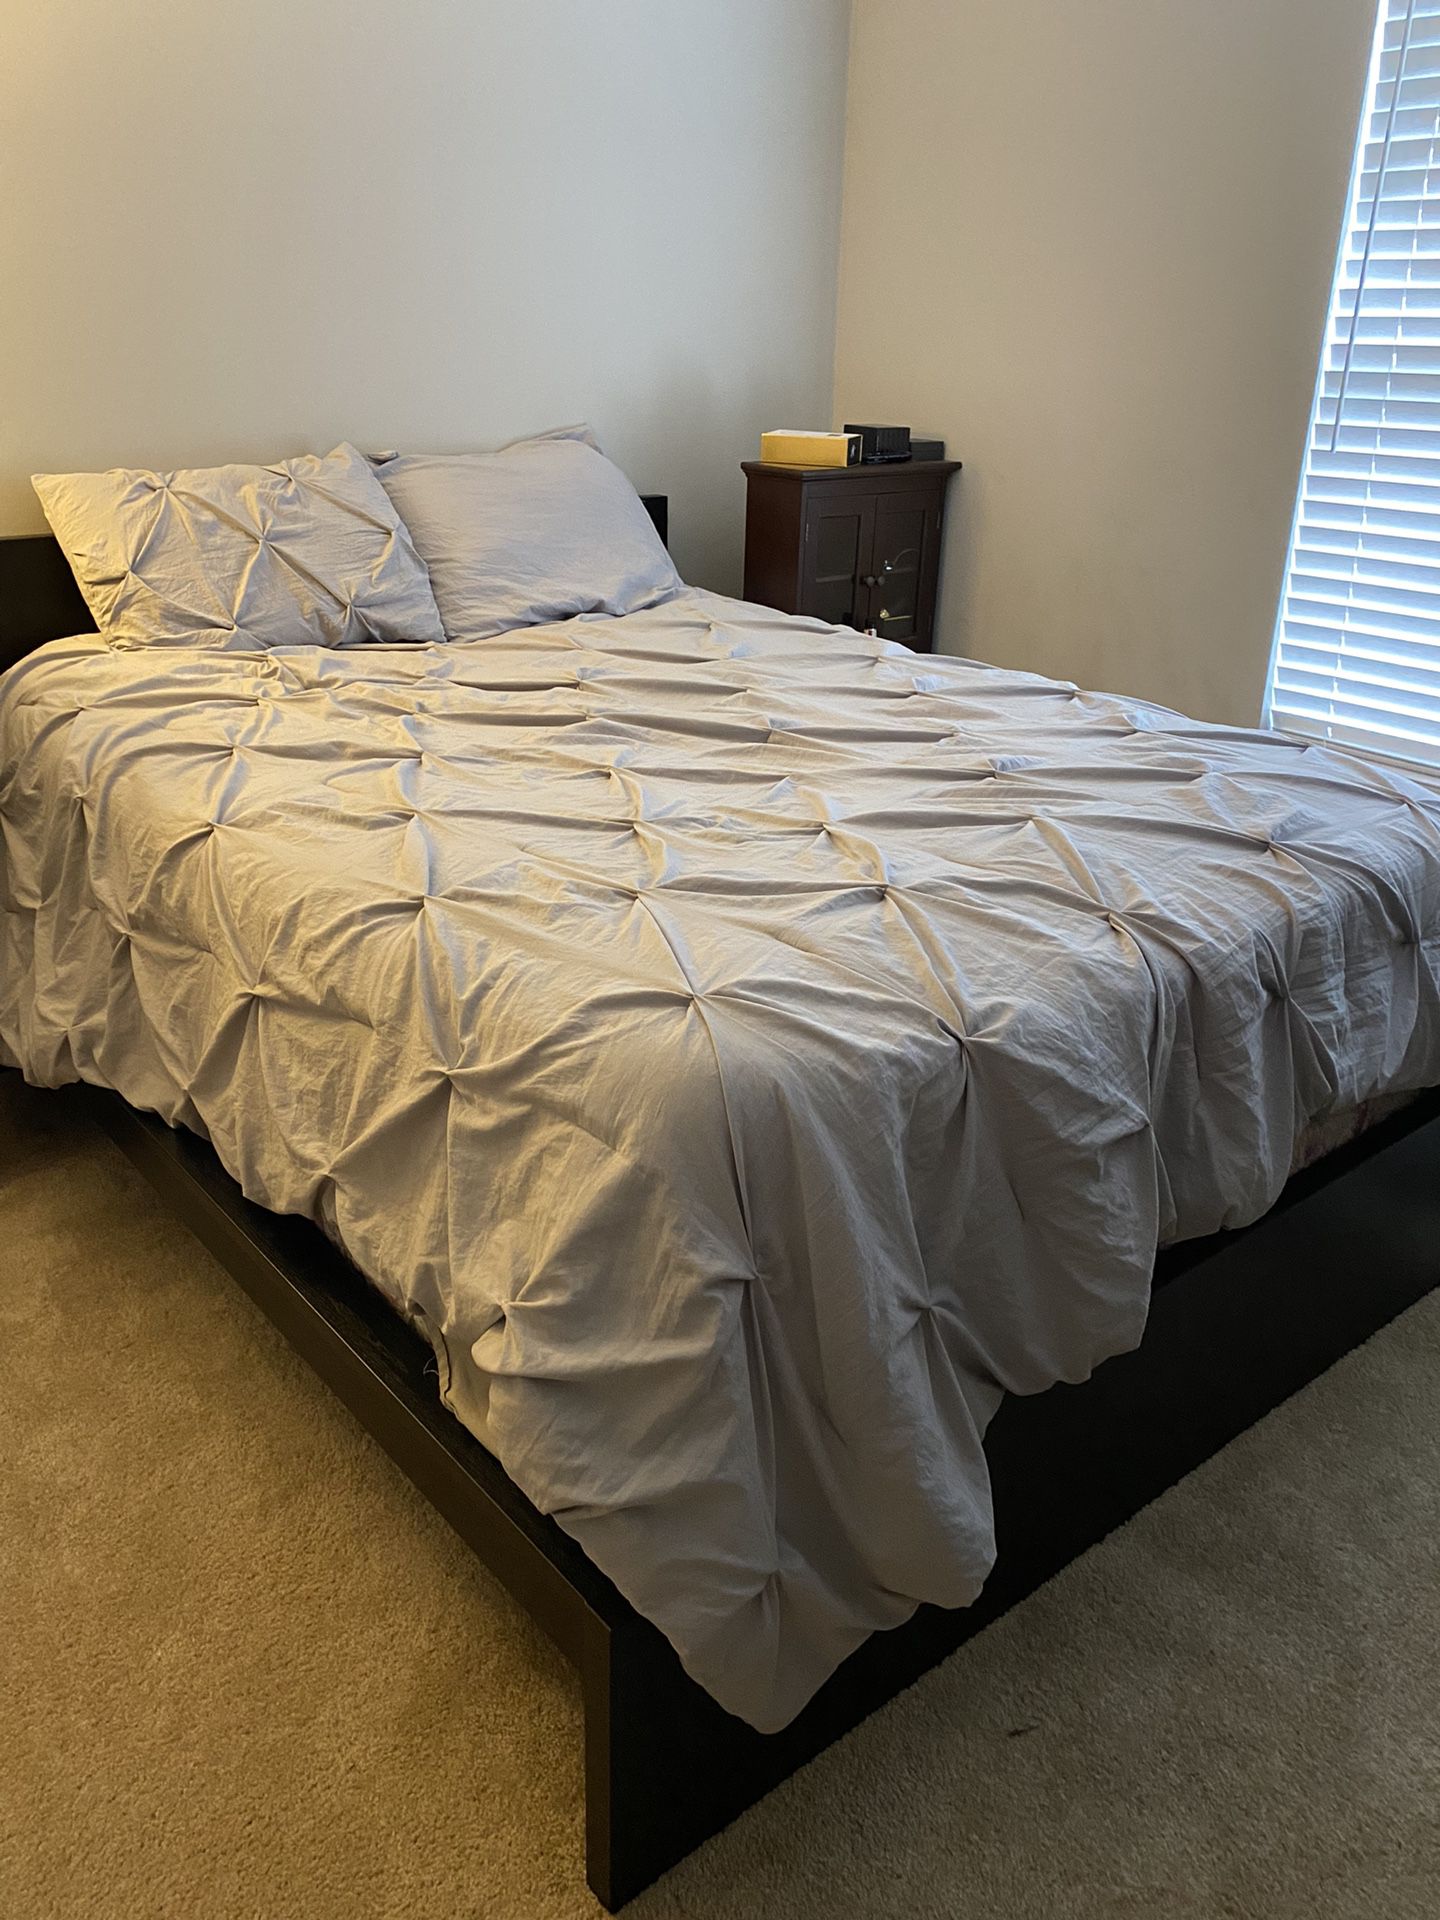 Queen Sized Bed Frame And Mattress With Storage 